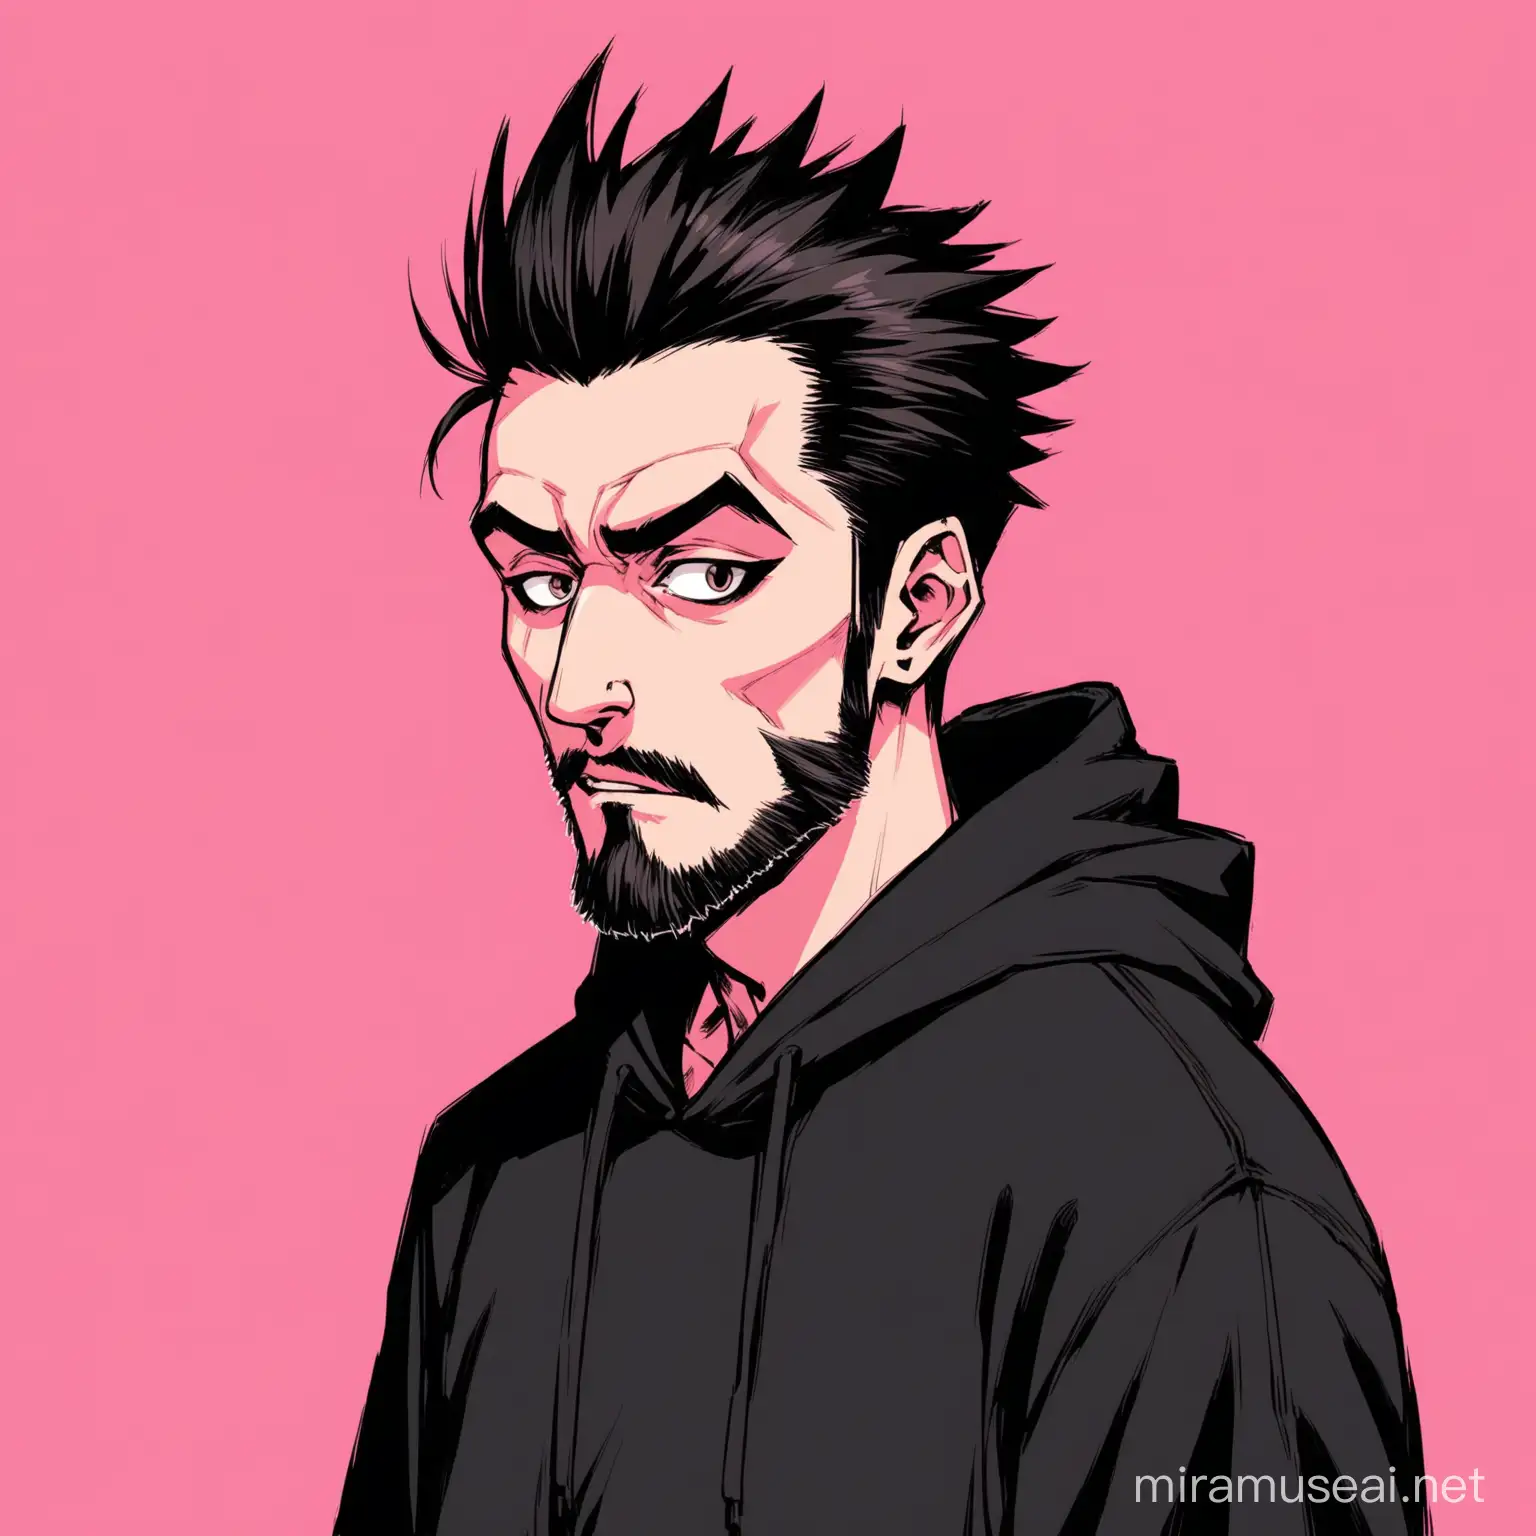 cool,hacker,black hoodie,quiff hairs,aesthetic,m shaped hairline,oblong face shape,small mouth,big nose,handosme ,psycho,pink background,patchy beared


